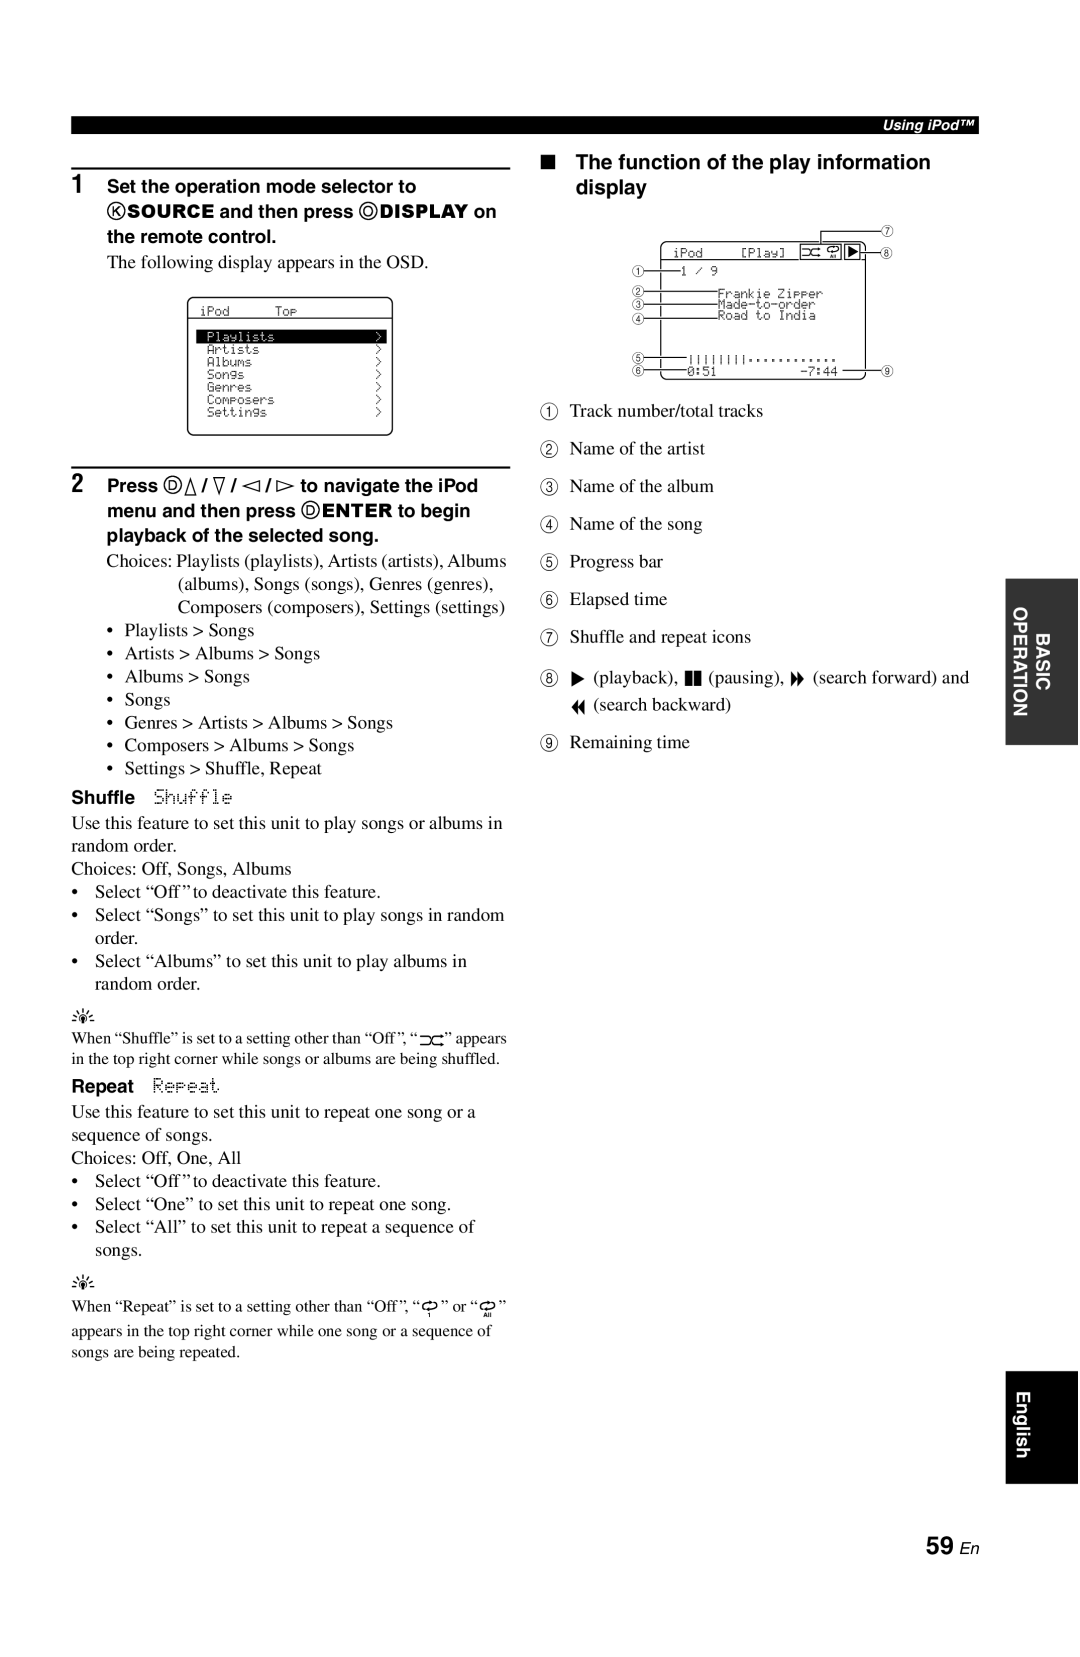 Yamaha RX-V861 owner manual 59 En, The function of the play information display 